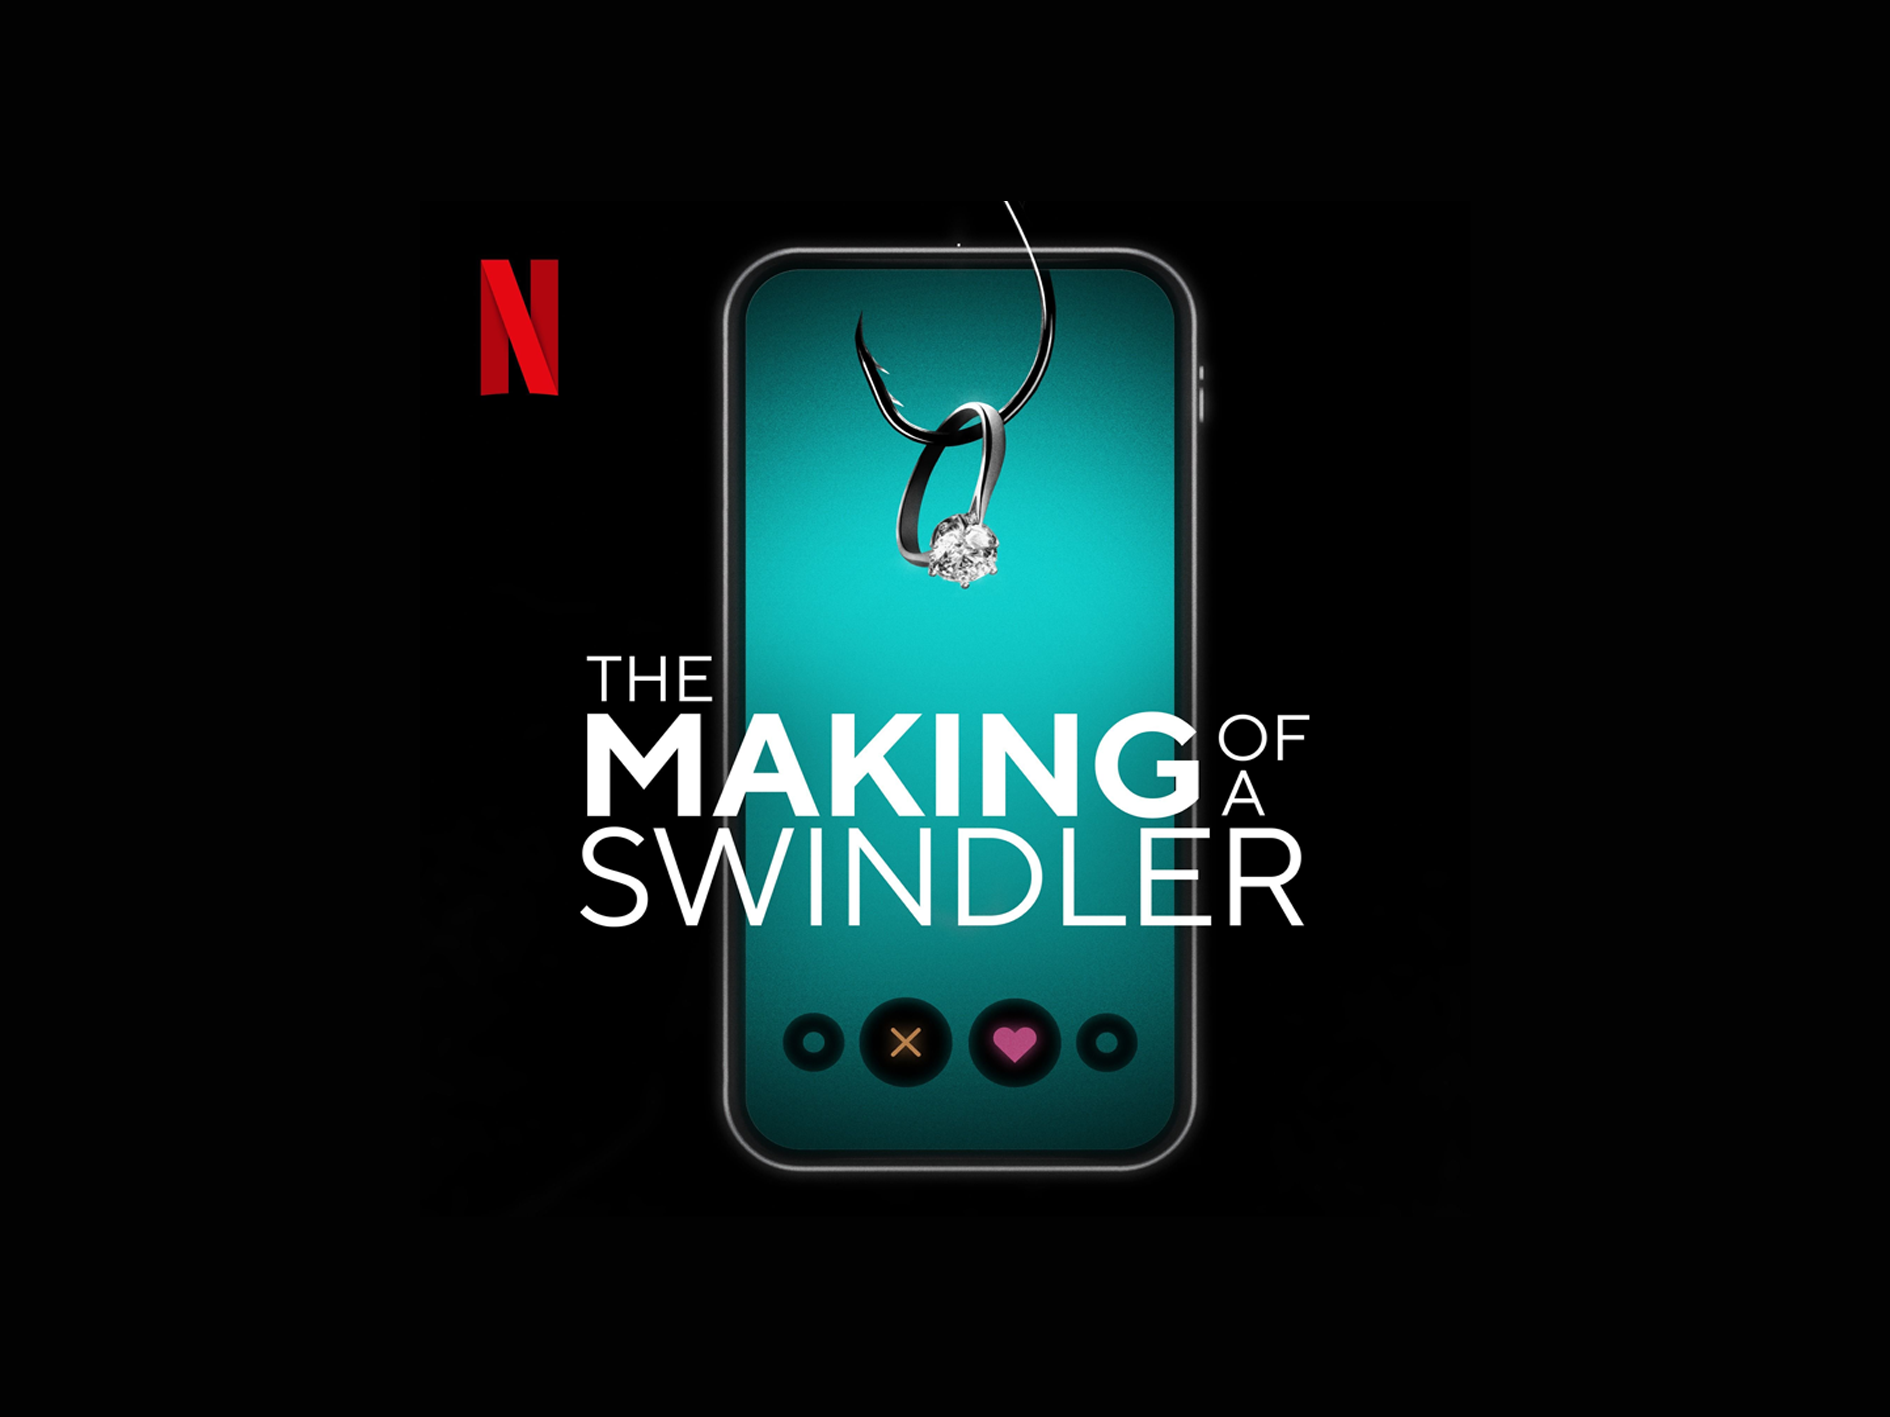 The Making of a swindler podcast